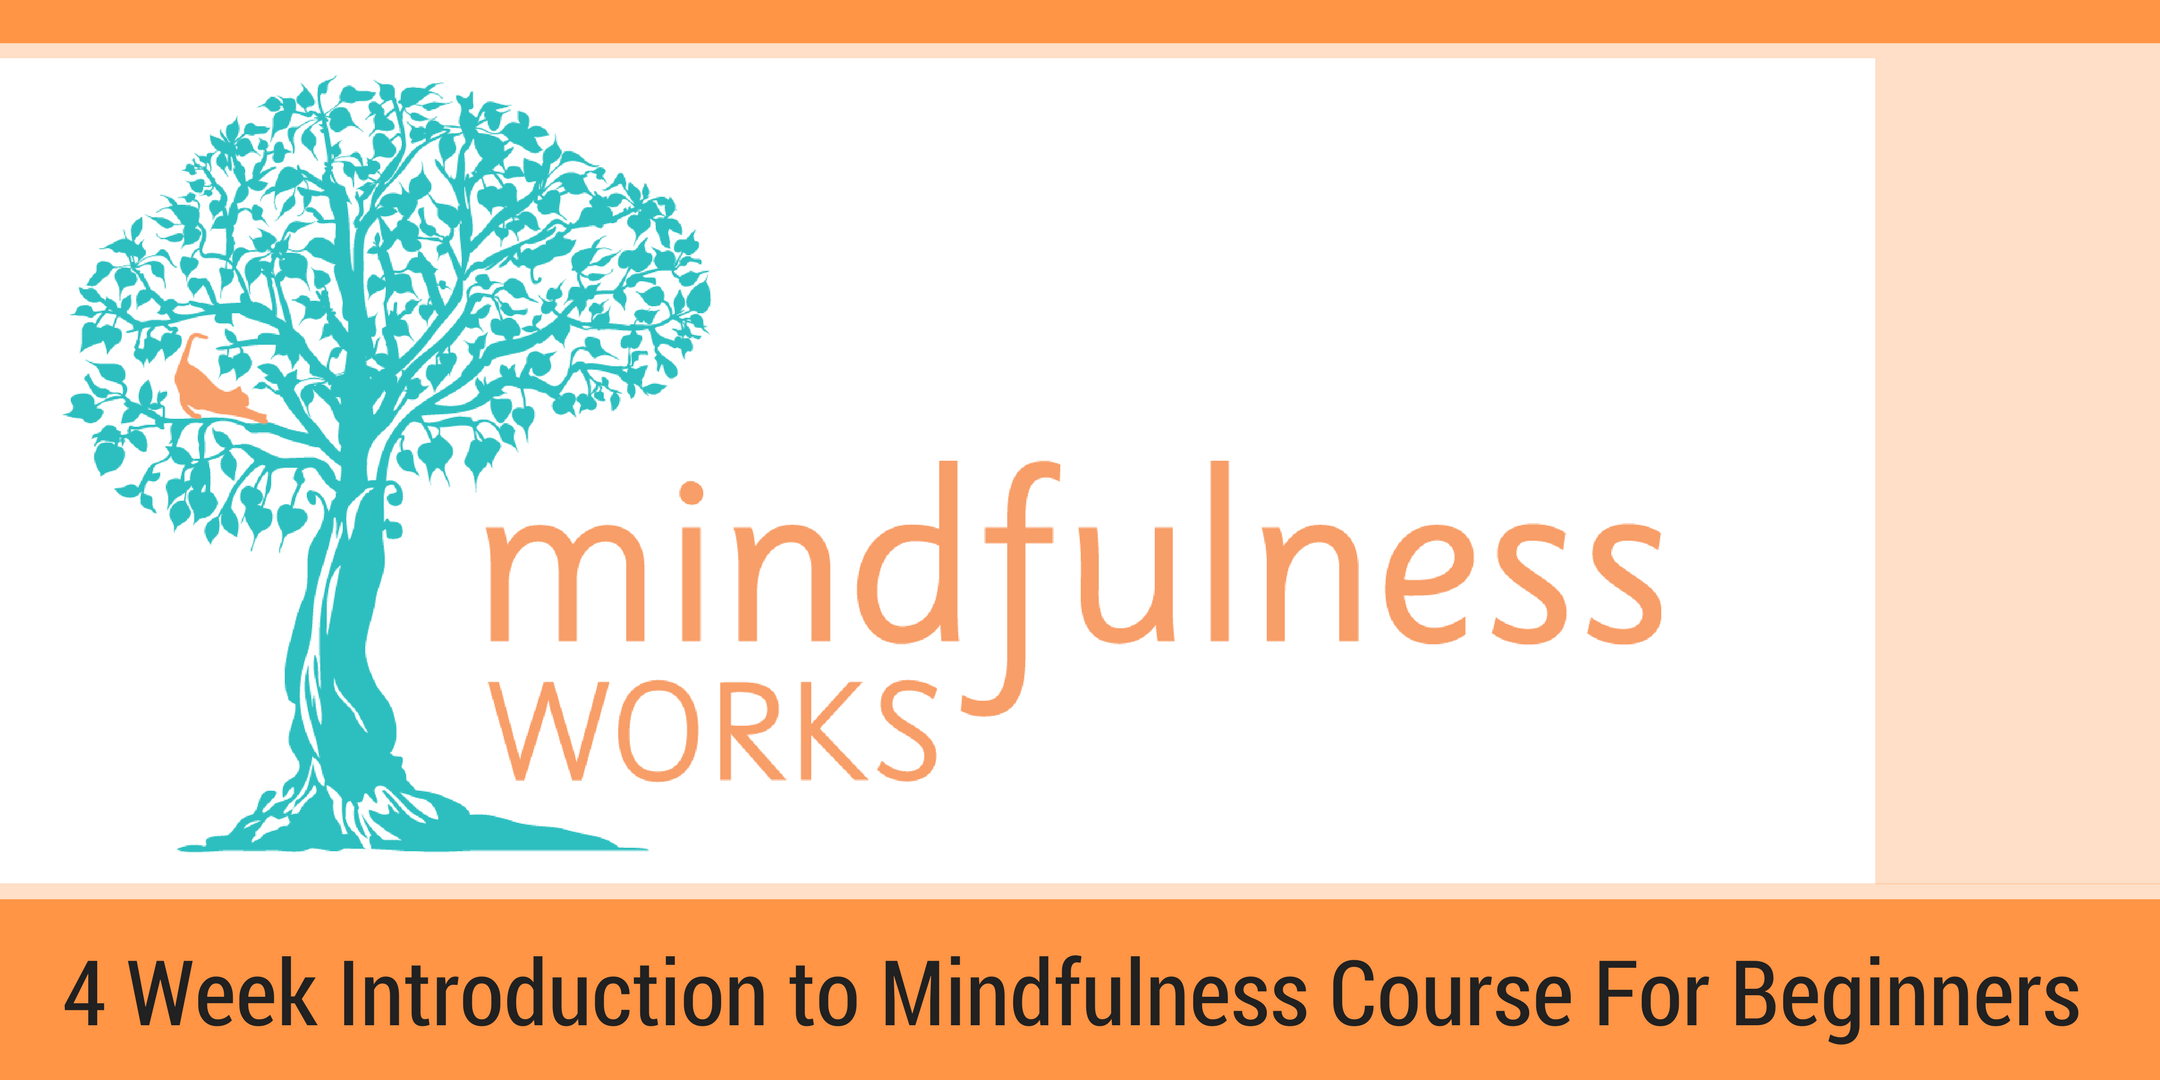 Townsville – An Introduction to Mindfulness & Meditation 4 Week Course